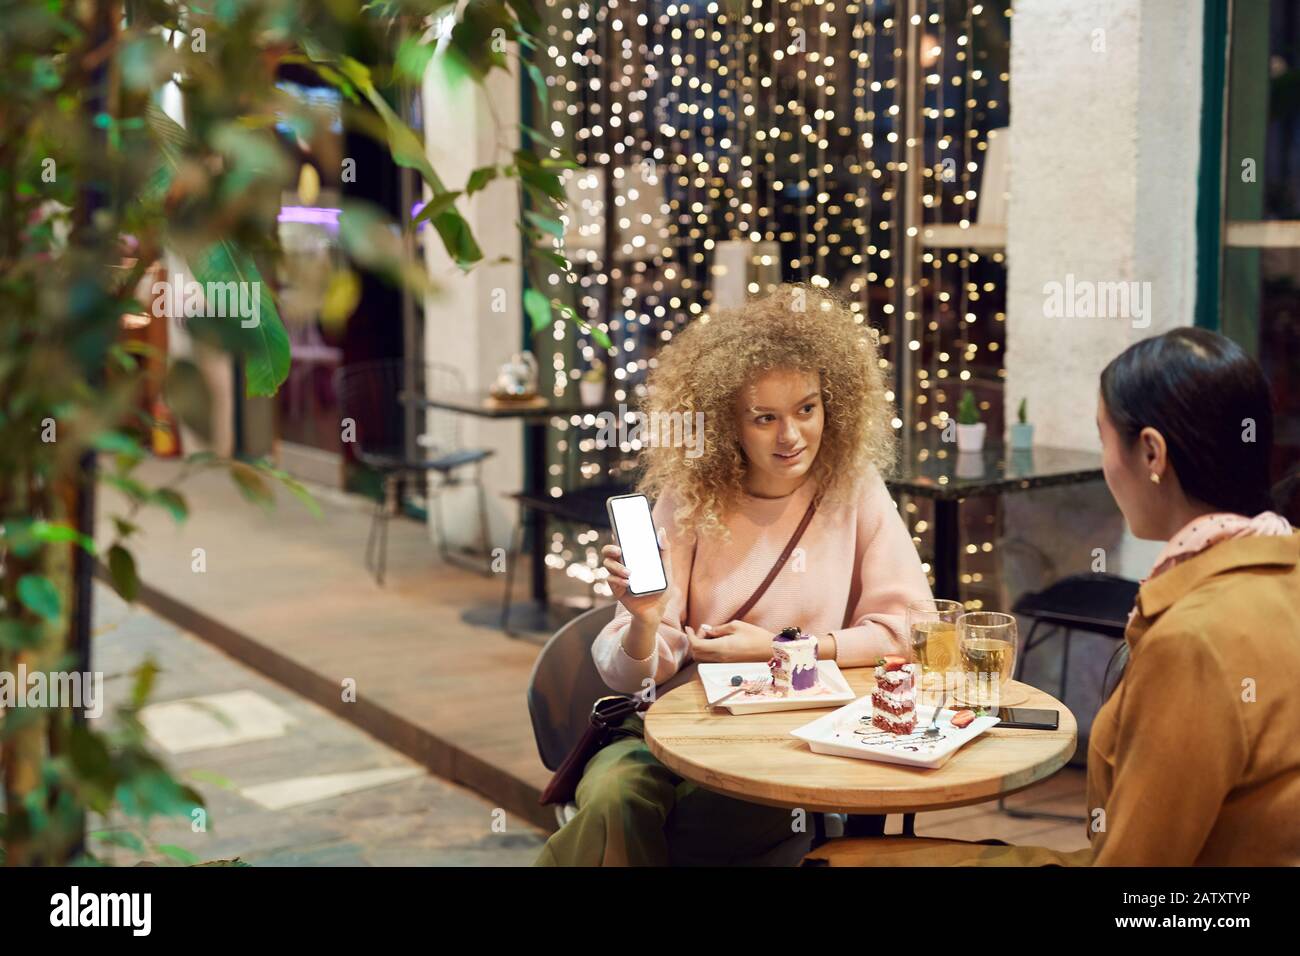 Young woman holding mobile phone and showing photos to her friend during their lunch in cafe Stock Photo